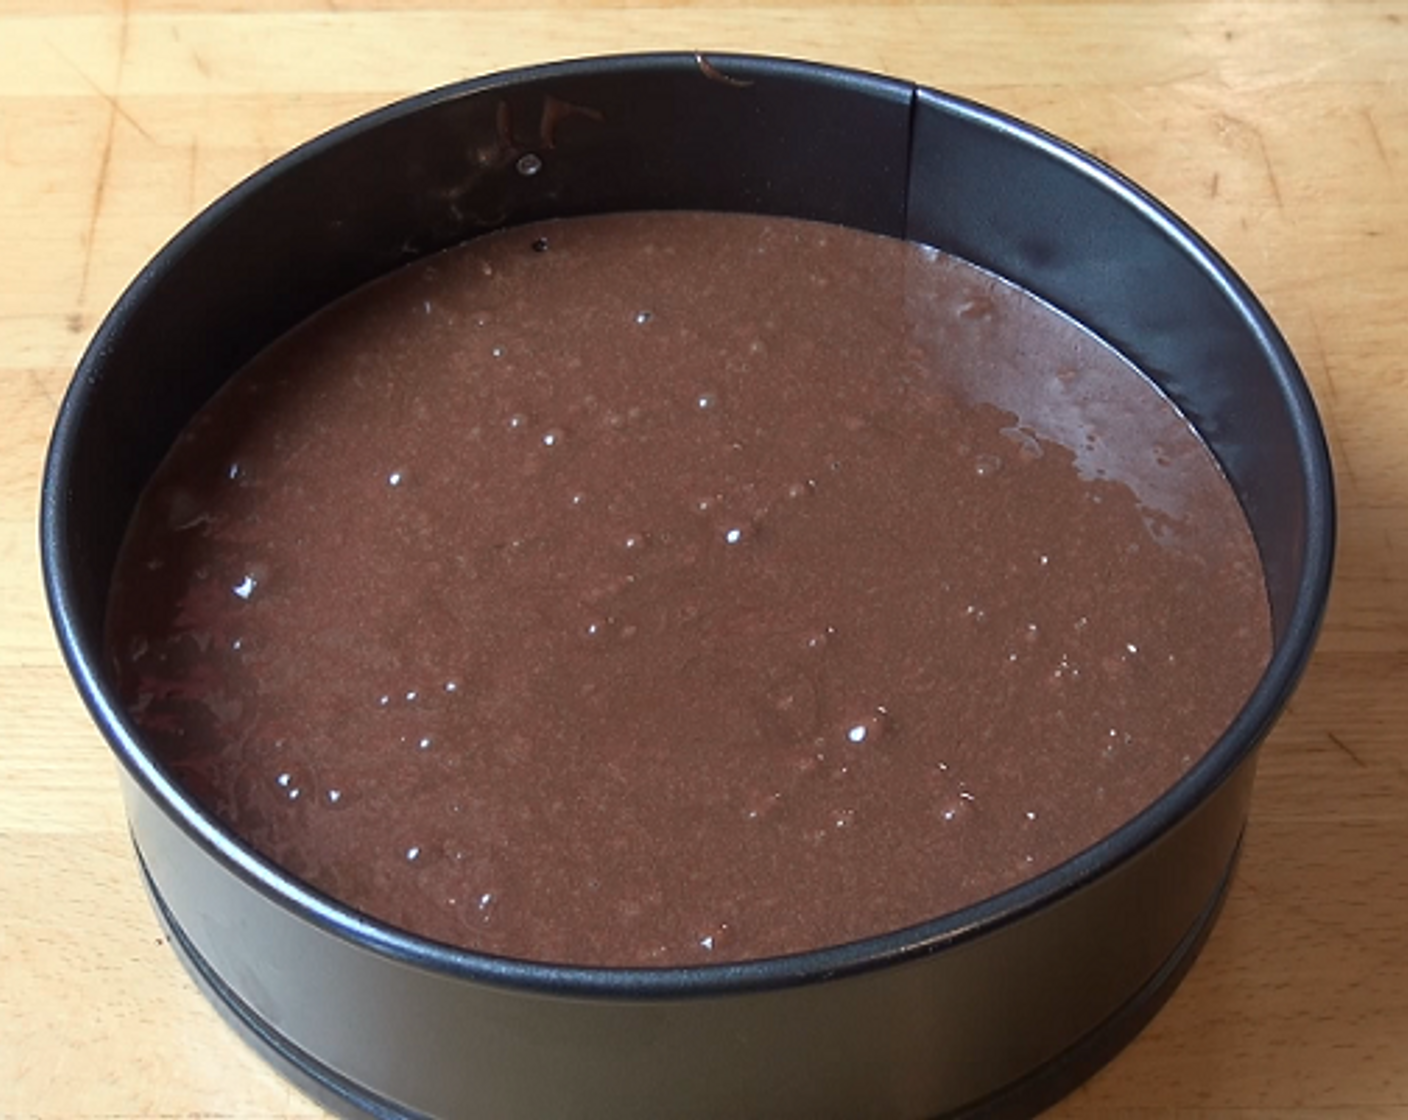 step 2 Lightly grease and line a 20-centimeter cake tin with baking paper. Carefully pour in the batter. Cook at 180 degrees C (350 degrees F) for 35-40 minutes or until cooked all the way through.